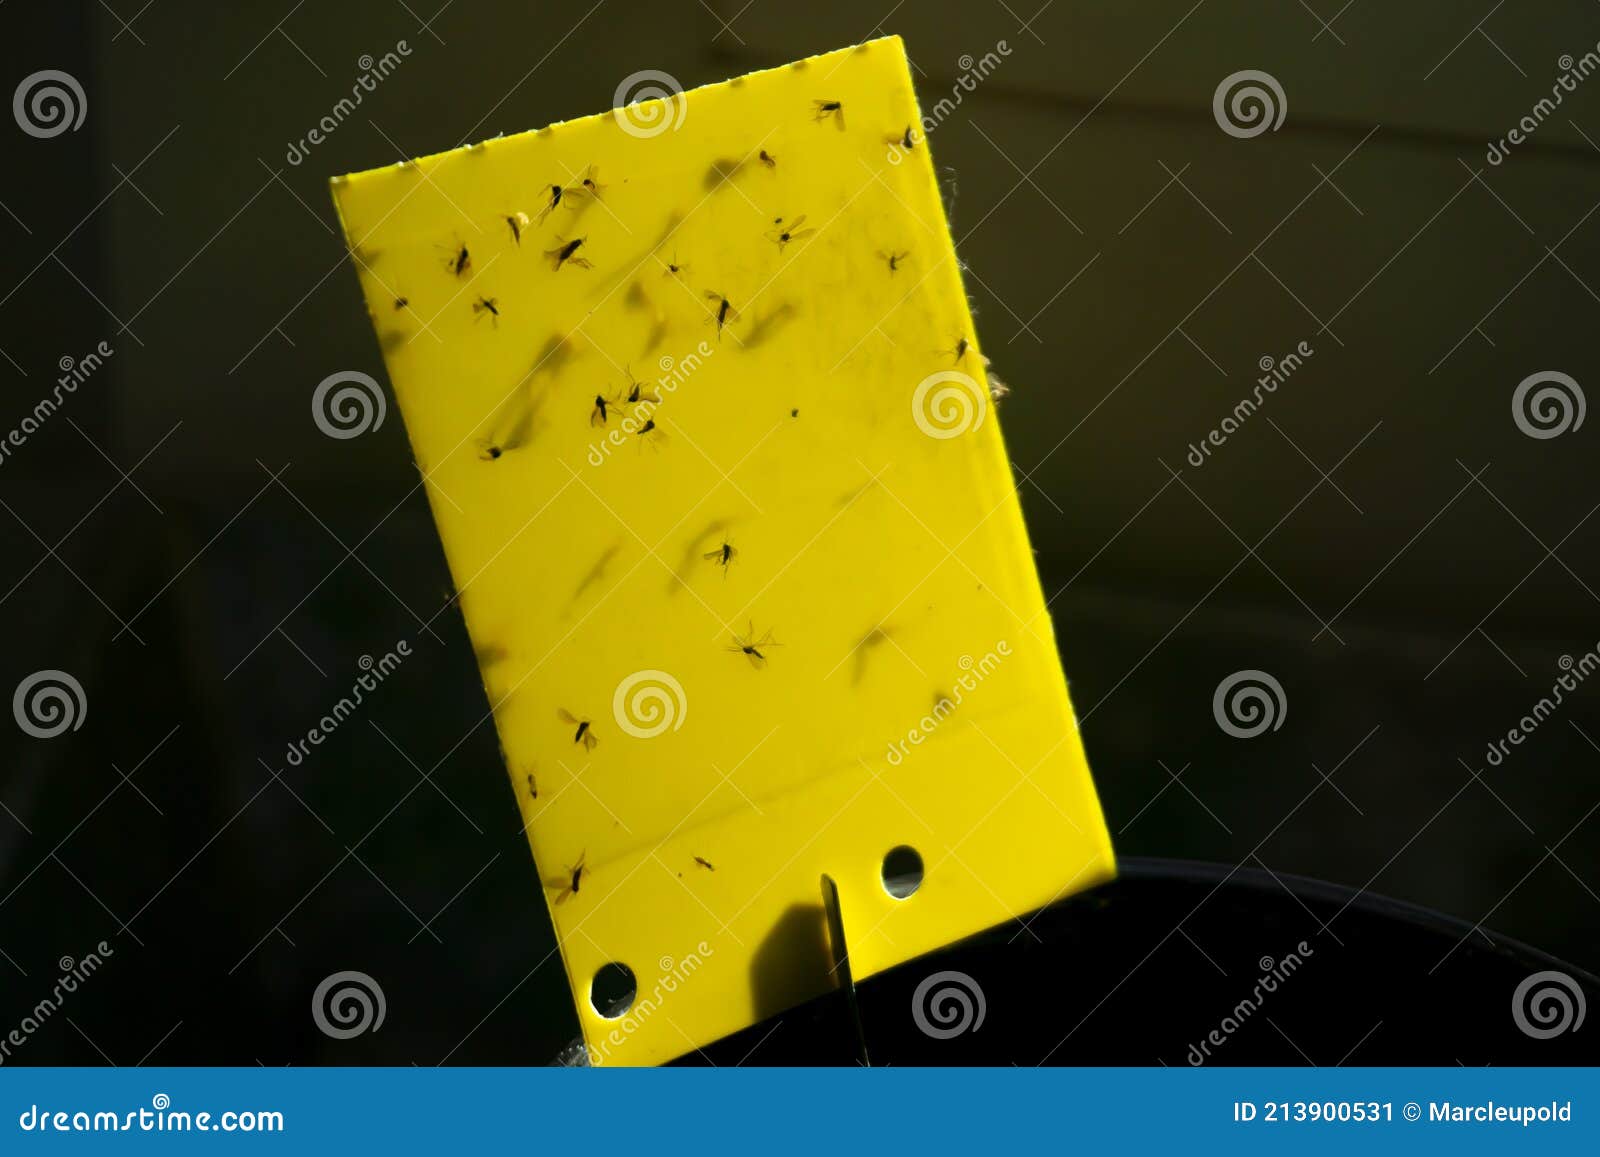 Dark-winged fungus gnats and white flies are stuck on a yellow